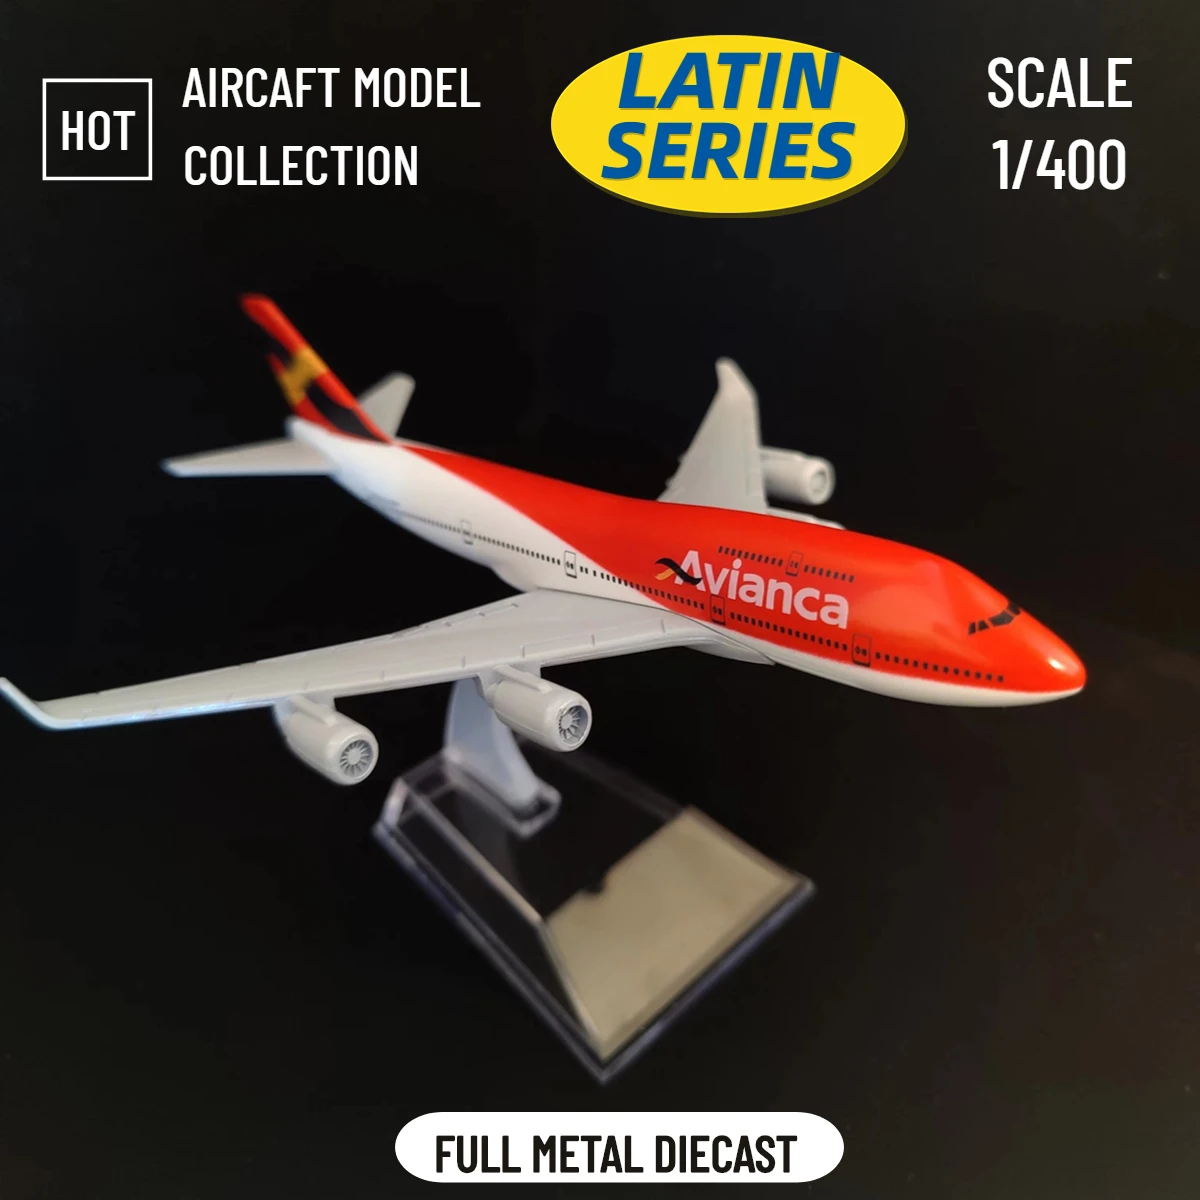 

Scale 1:400 Metal Aircraft Replica Latin Avianca GOL Airlines Plane Boeing Airbus Aviation Model Diecast Airplane Miniature Gift